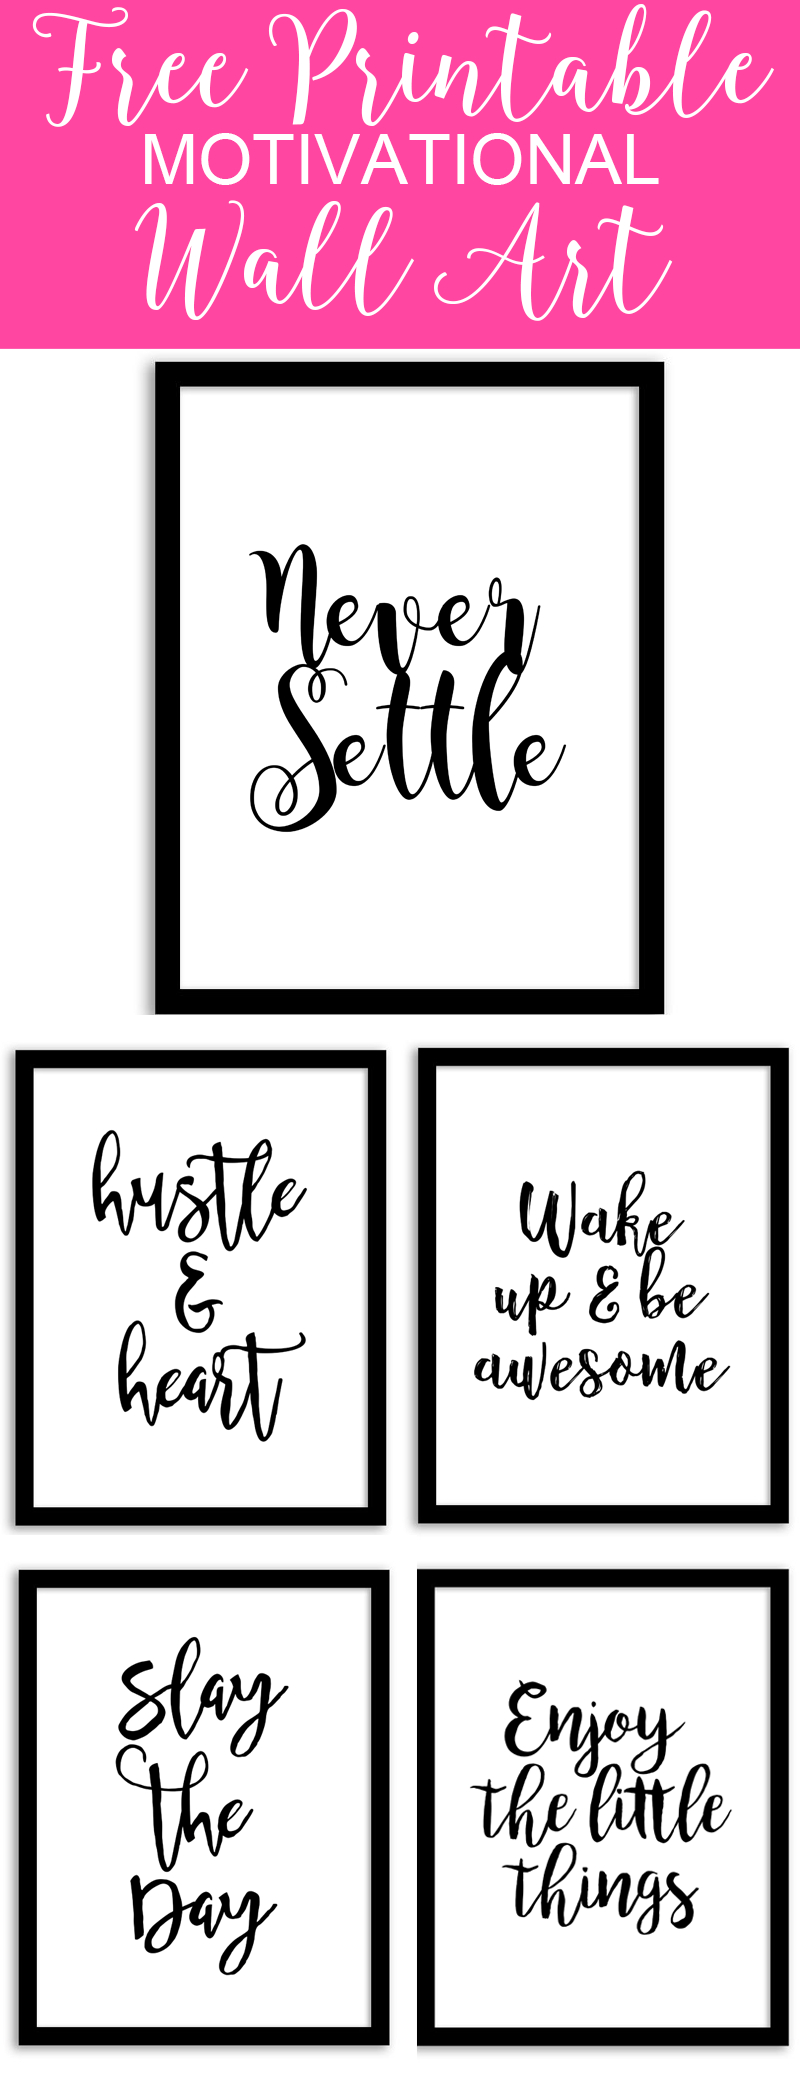 Free Printable Wall Art From @chicfetti - Perfect For Your Office Of - Free Printable Wall Art Quotes